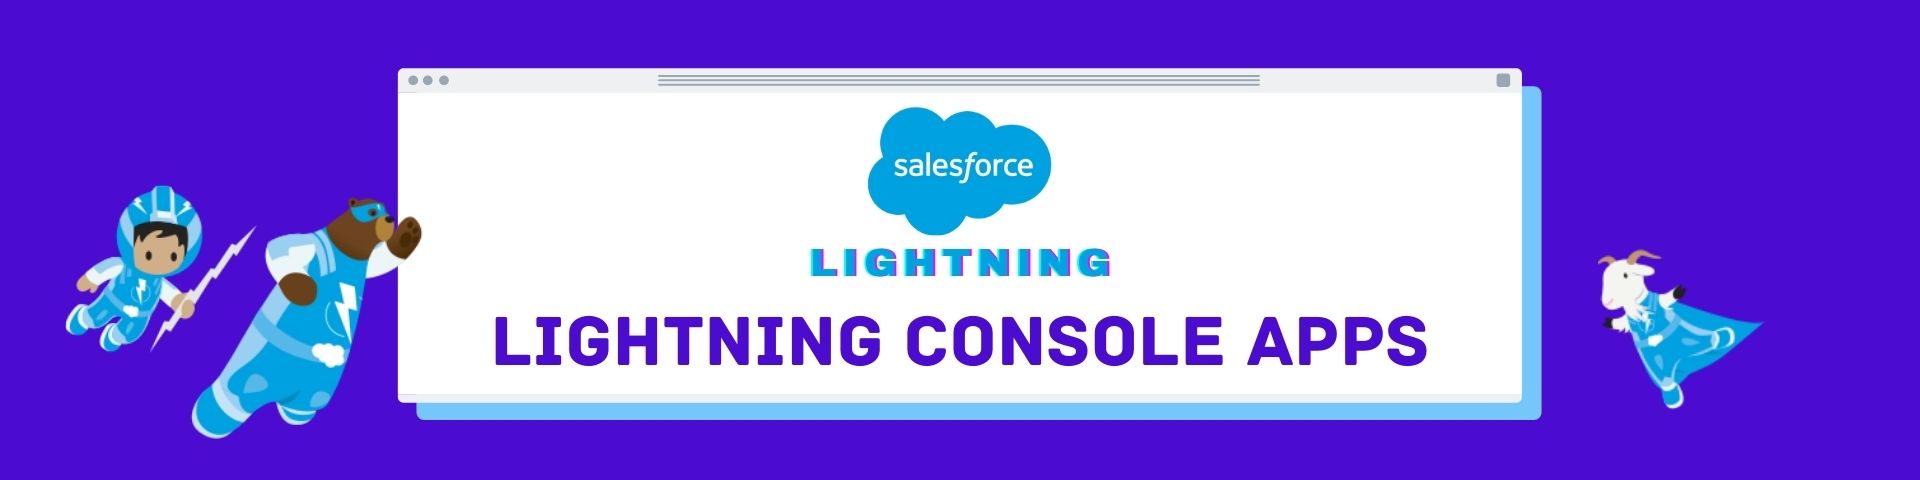 Salesforce Lightning Console apps